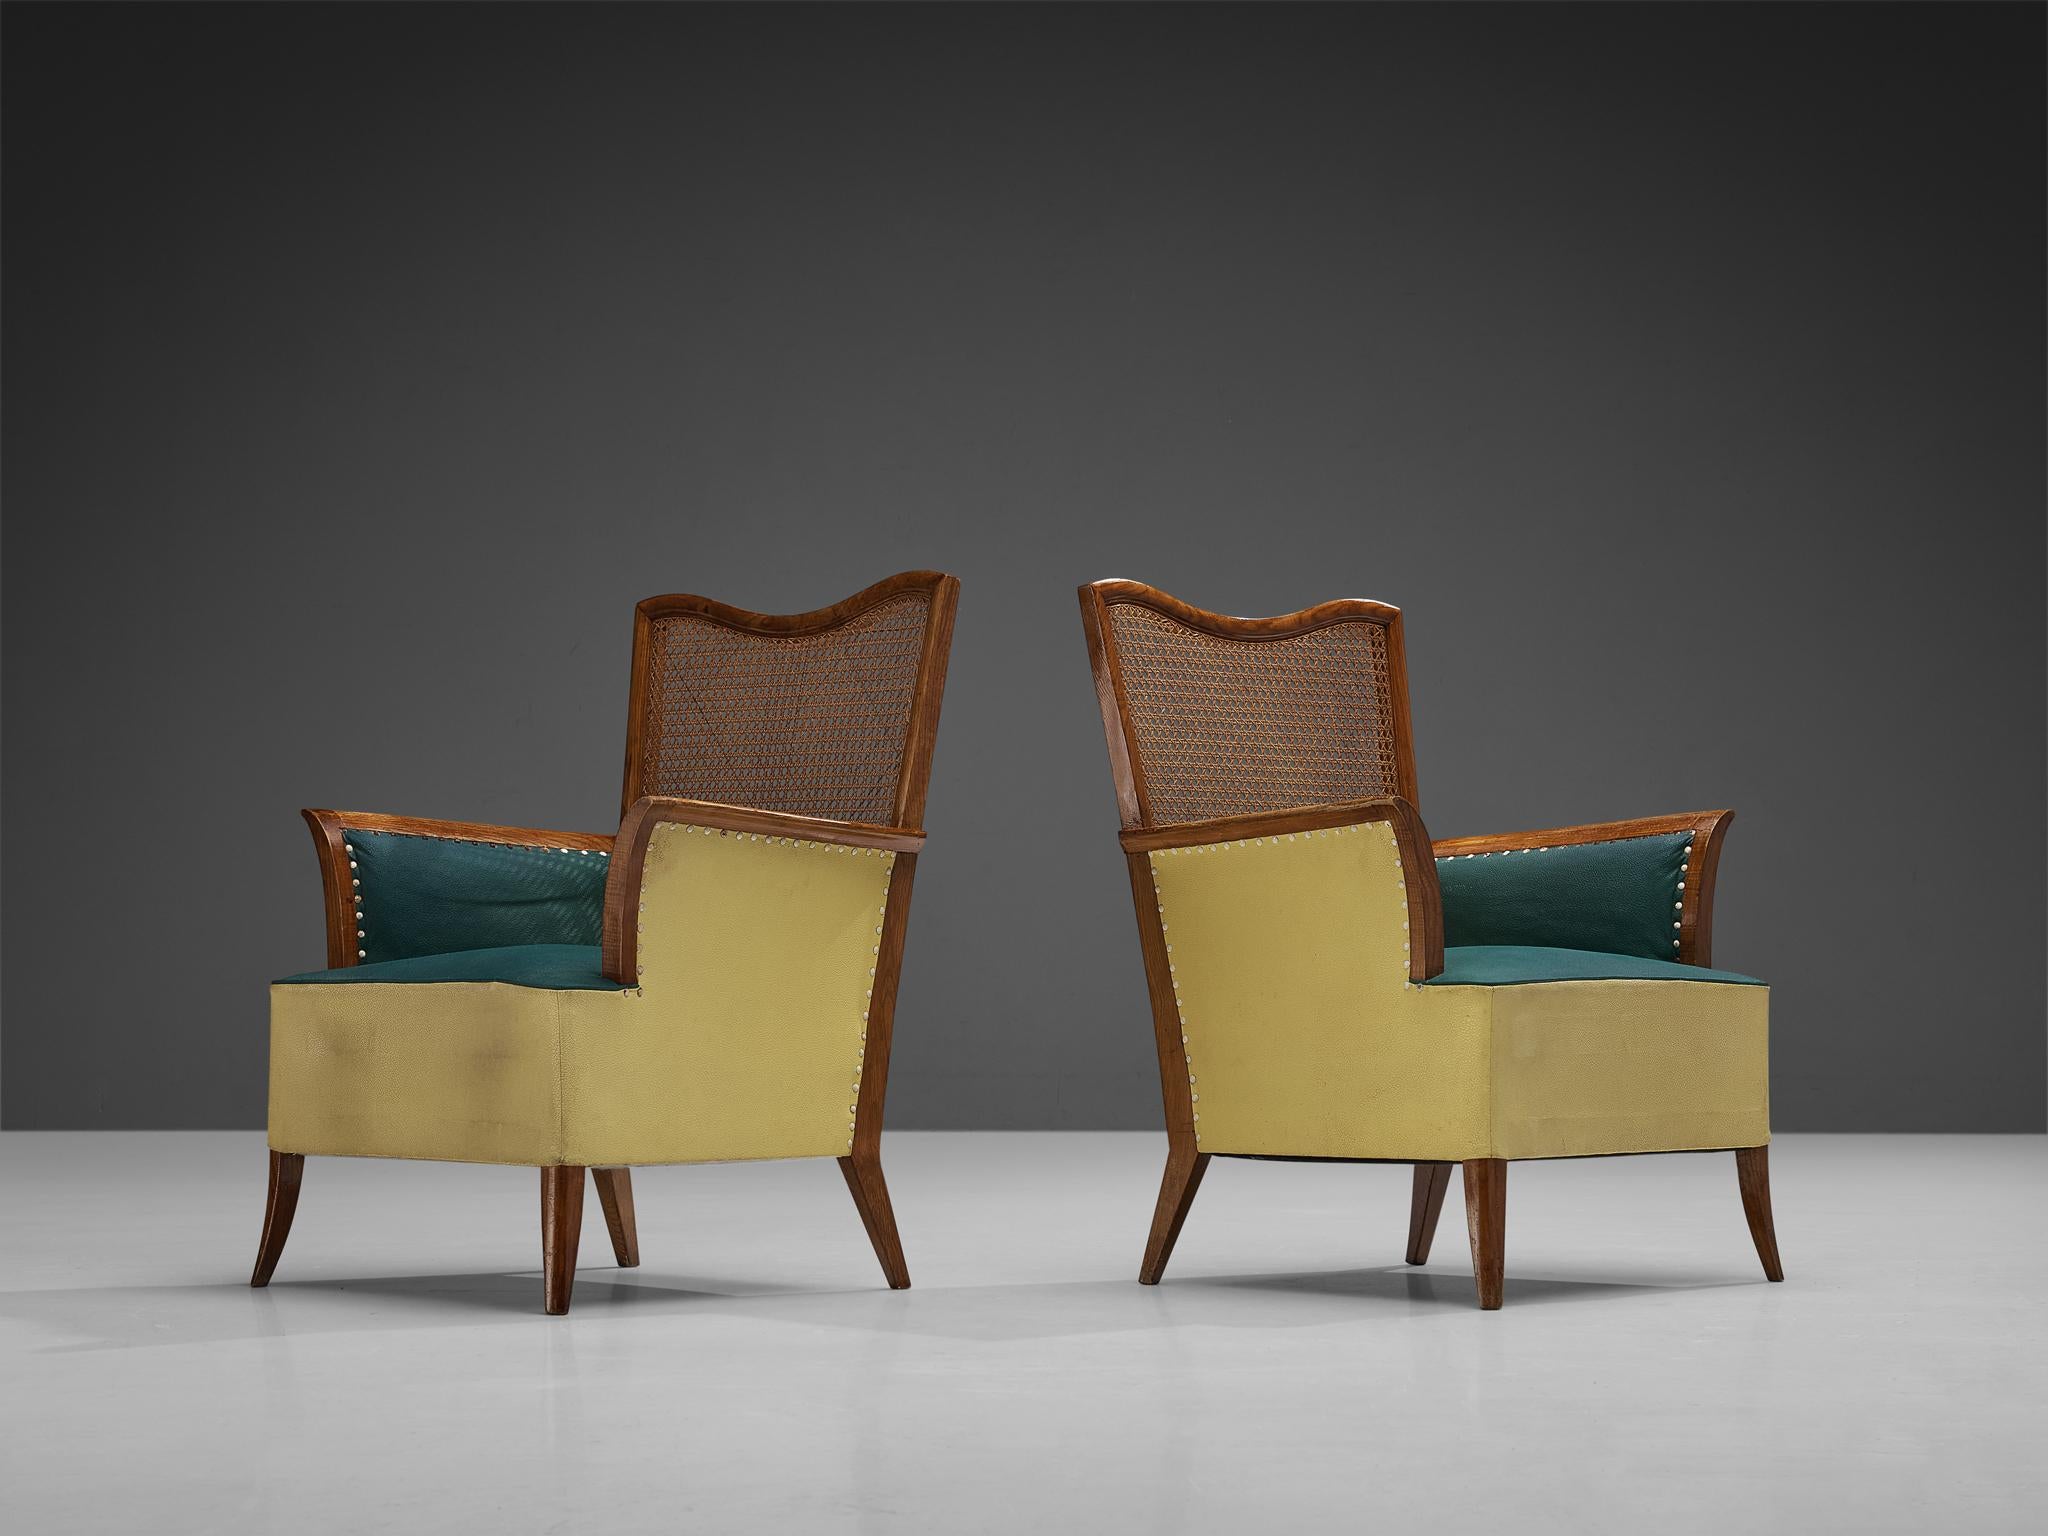 Pair of easy chairs, ash, cane, leatherette, metal, Spain, 1950s. 

Joyful pair of Spanish lounge chairs with soft organic lines. These chairs feature a stained ash frame of which a dynamic grain pattern comes through. The backrest is made of woven